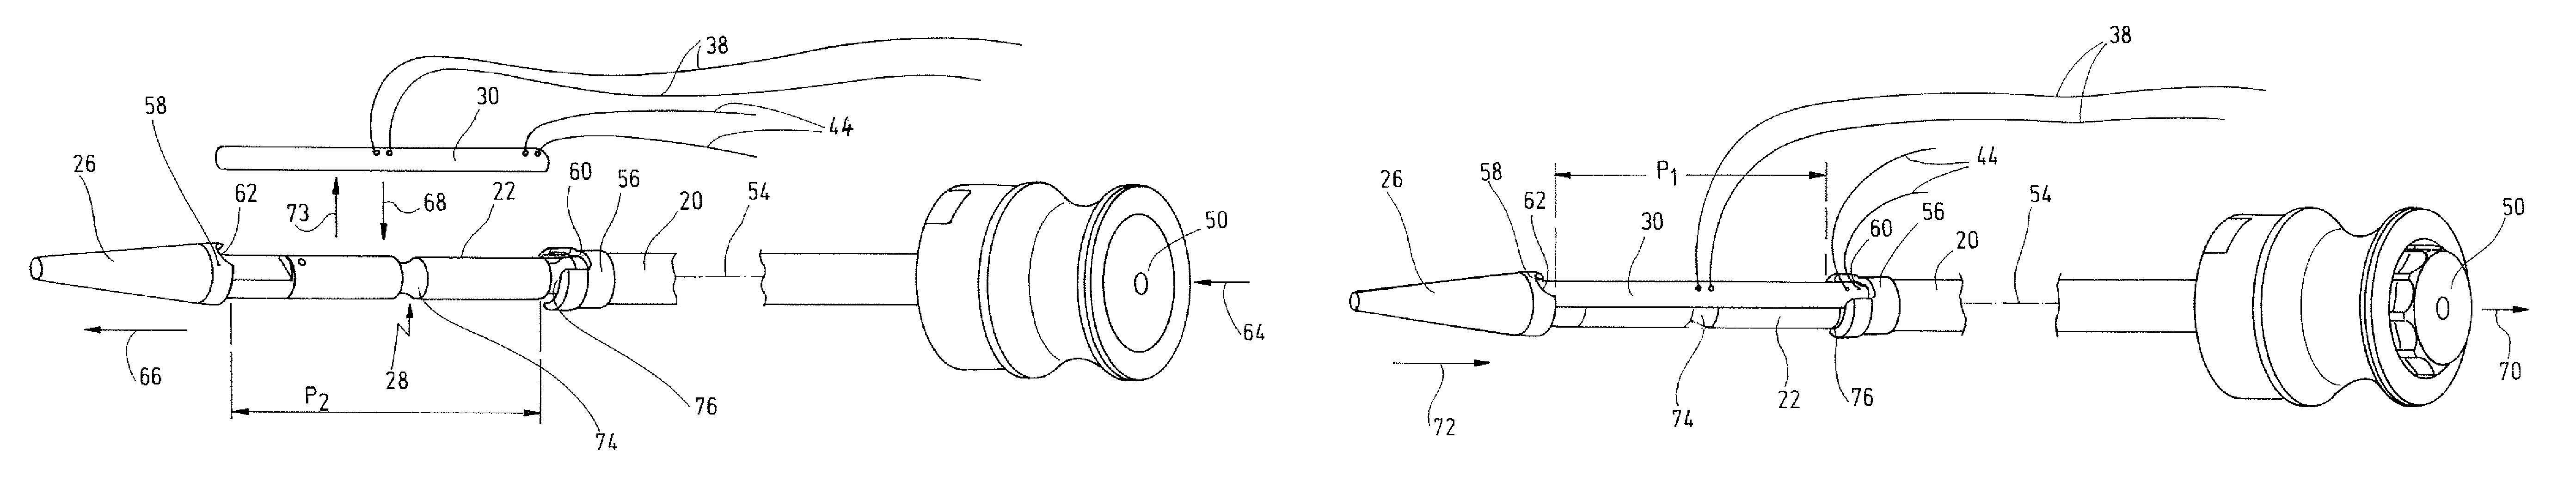 Device for inserting at least one anchor piece into a hollow space of a living being